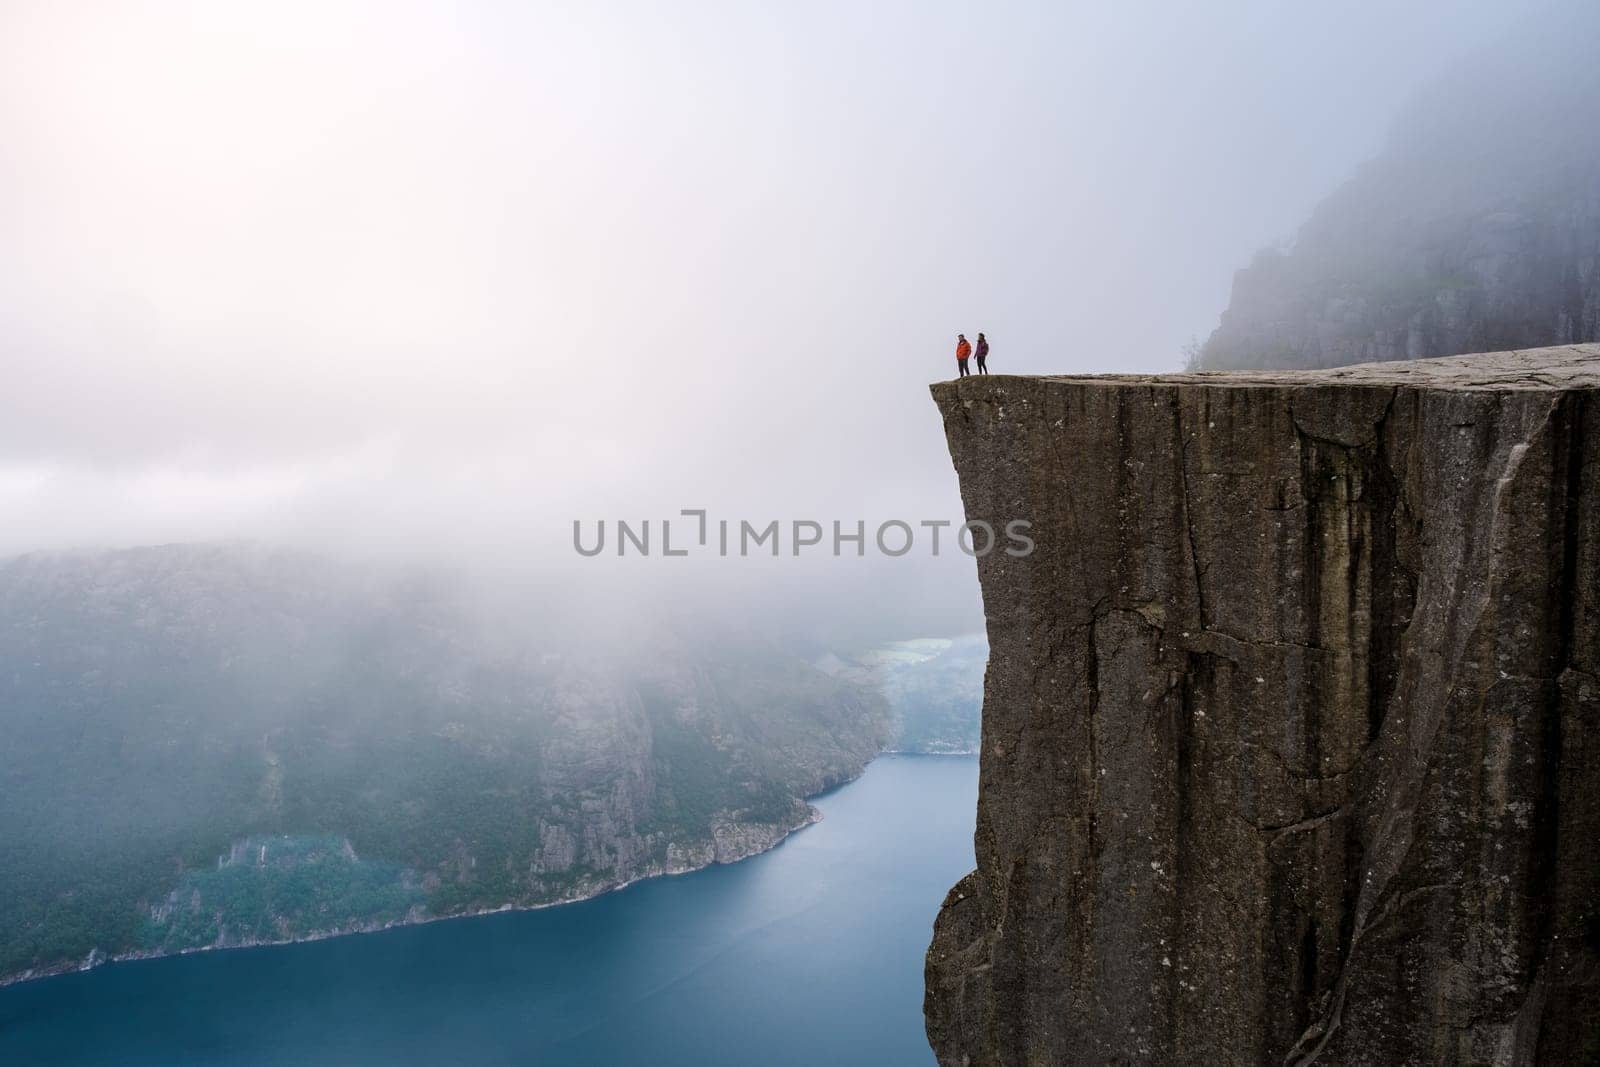 A view from the top of the Pulpit Rock in Norway, with two figures standing on the edge, looking out over the misty fjord. Preikestolen, Norway